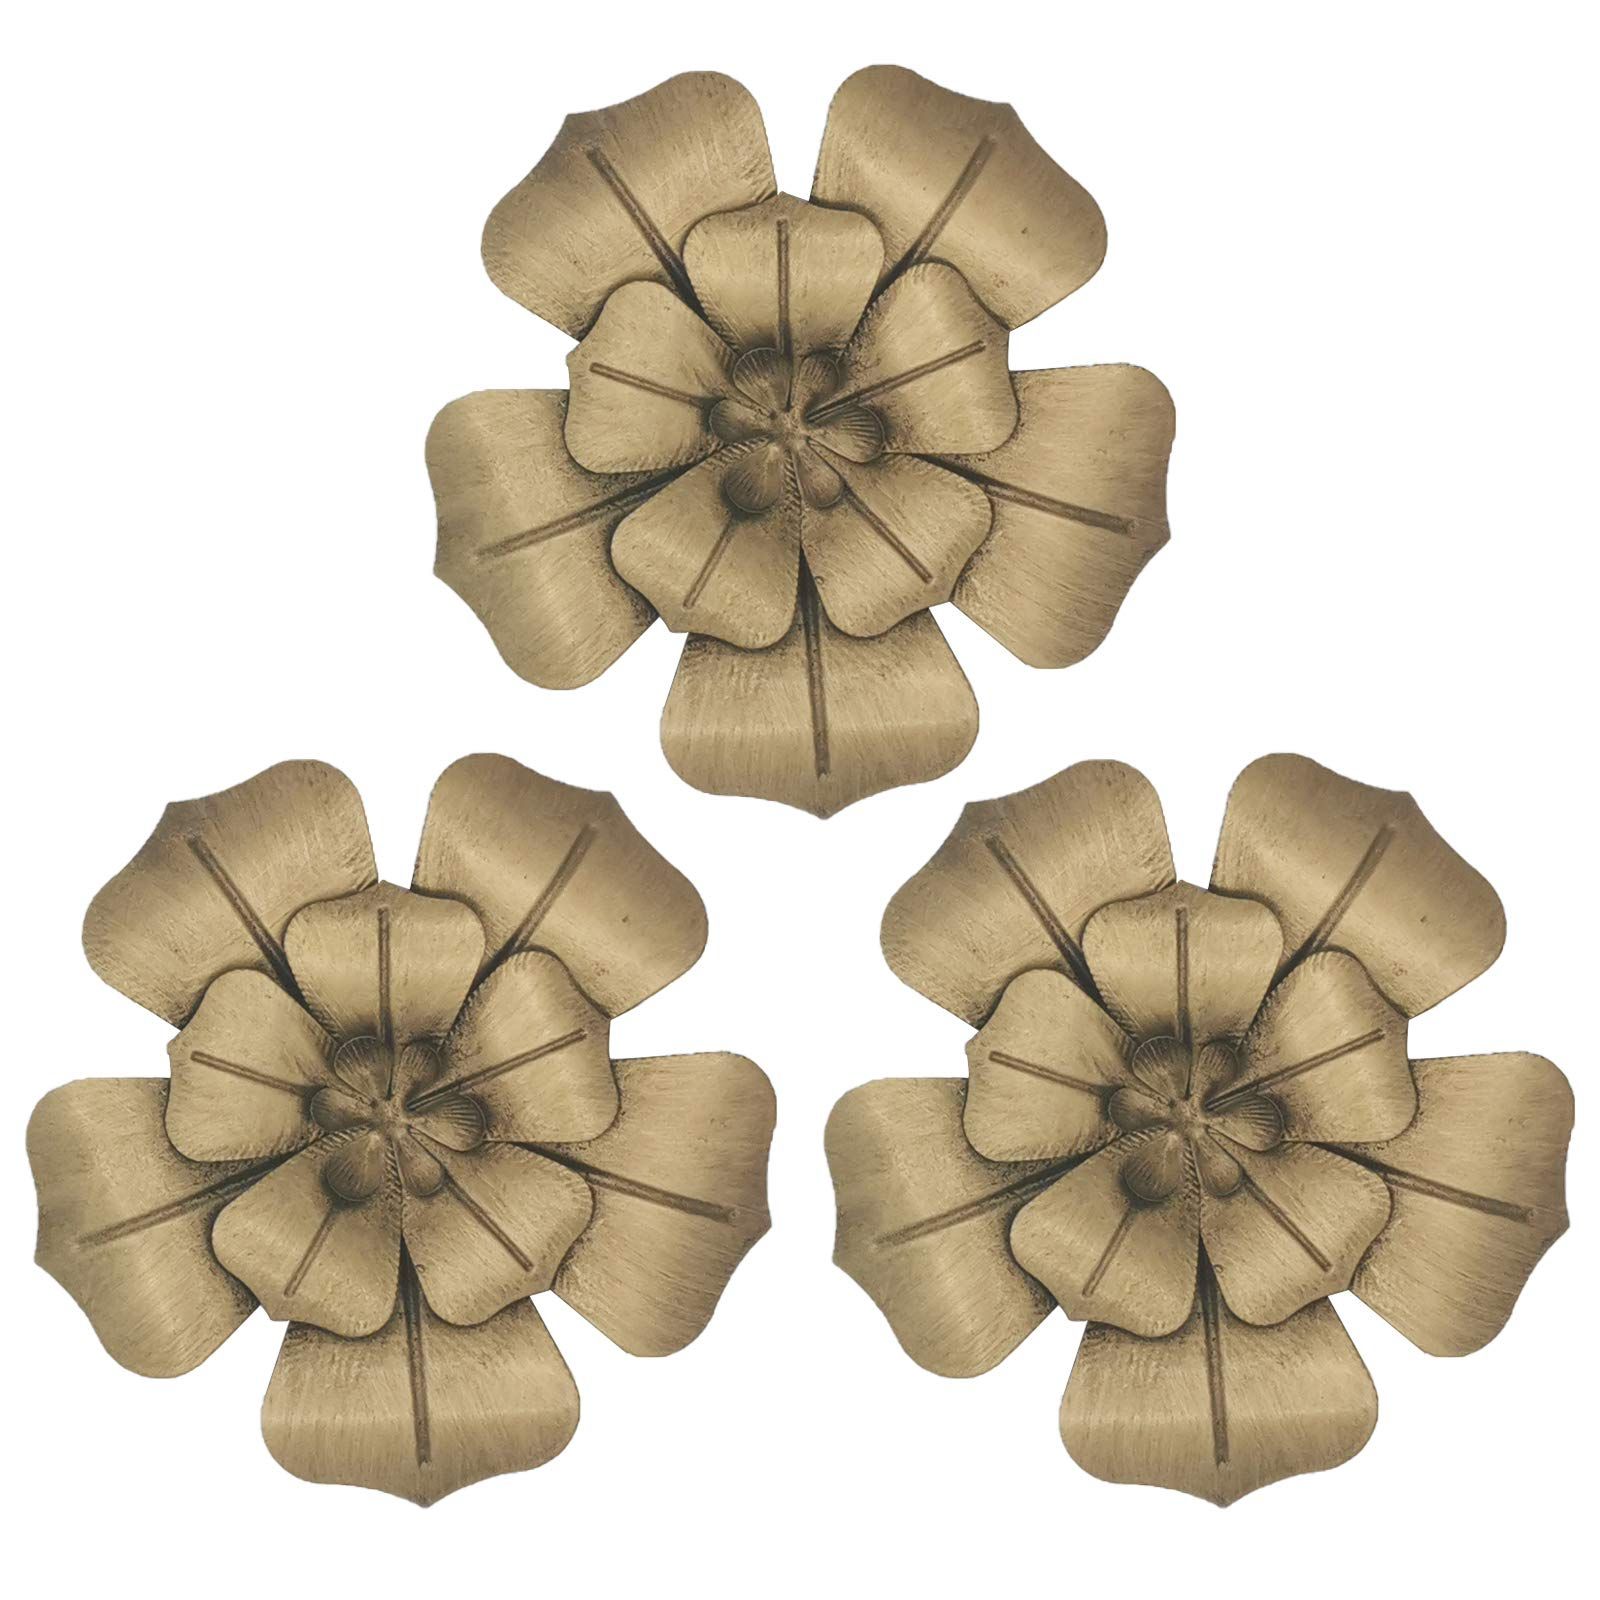 3 Layers Wall Sculptures Throughout Famous Amazon: Sqshun 6 Inch Multiple Layer Flower Metal Wall Art Decor Set Of  3 (gold) : Patio, Lawn & Garden (Photo 13 of 15)